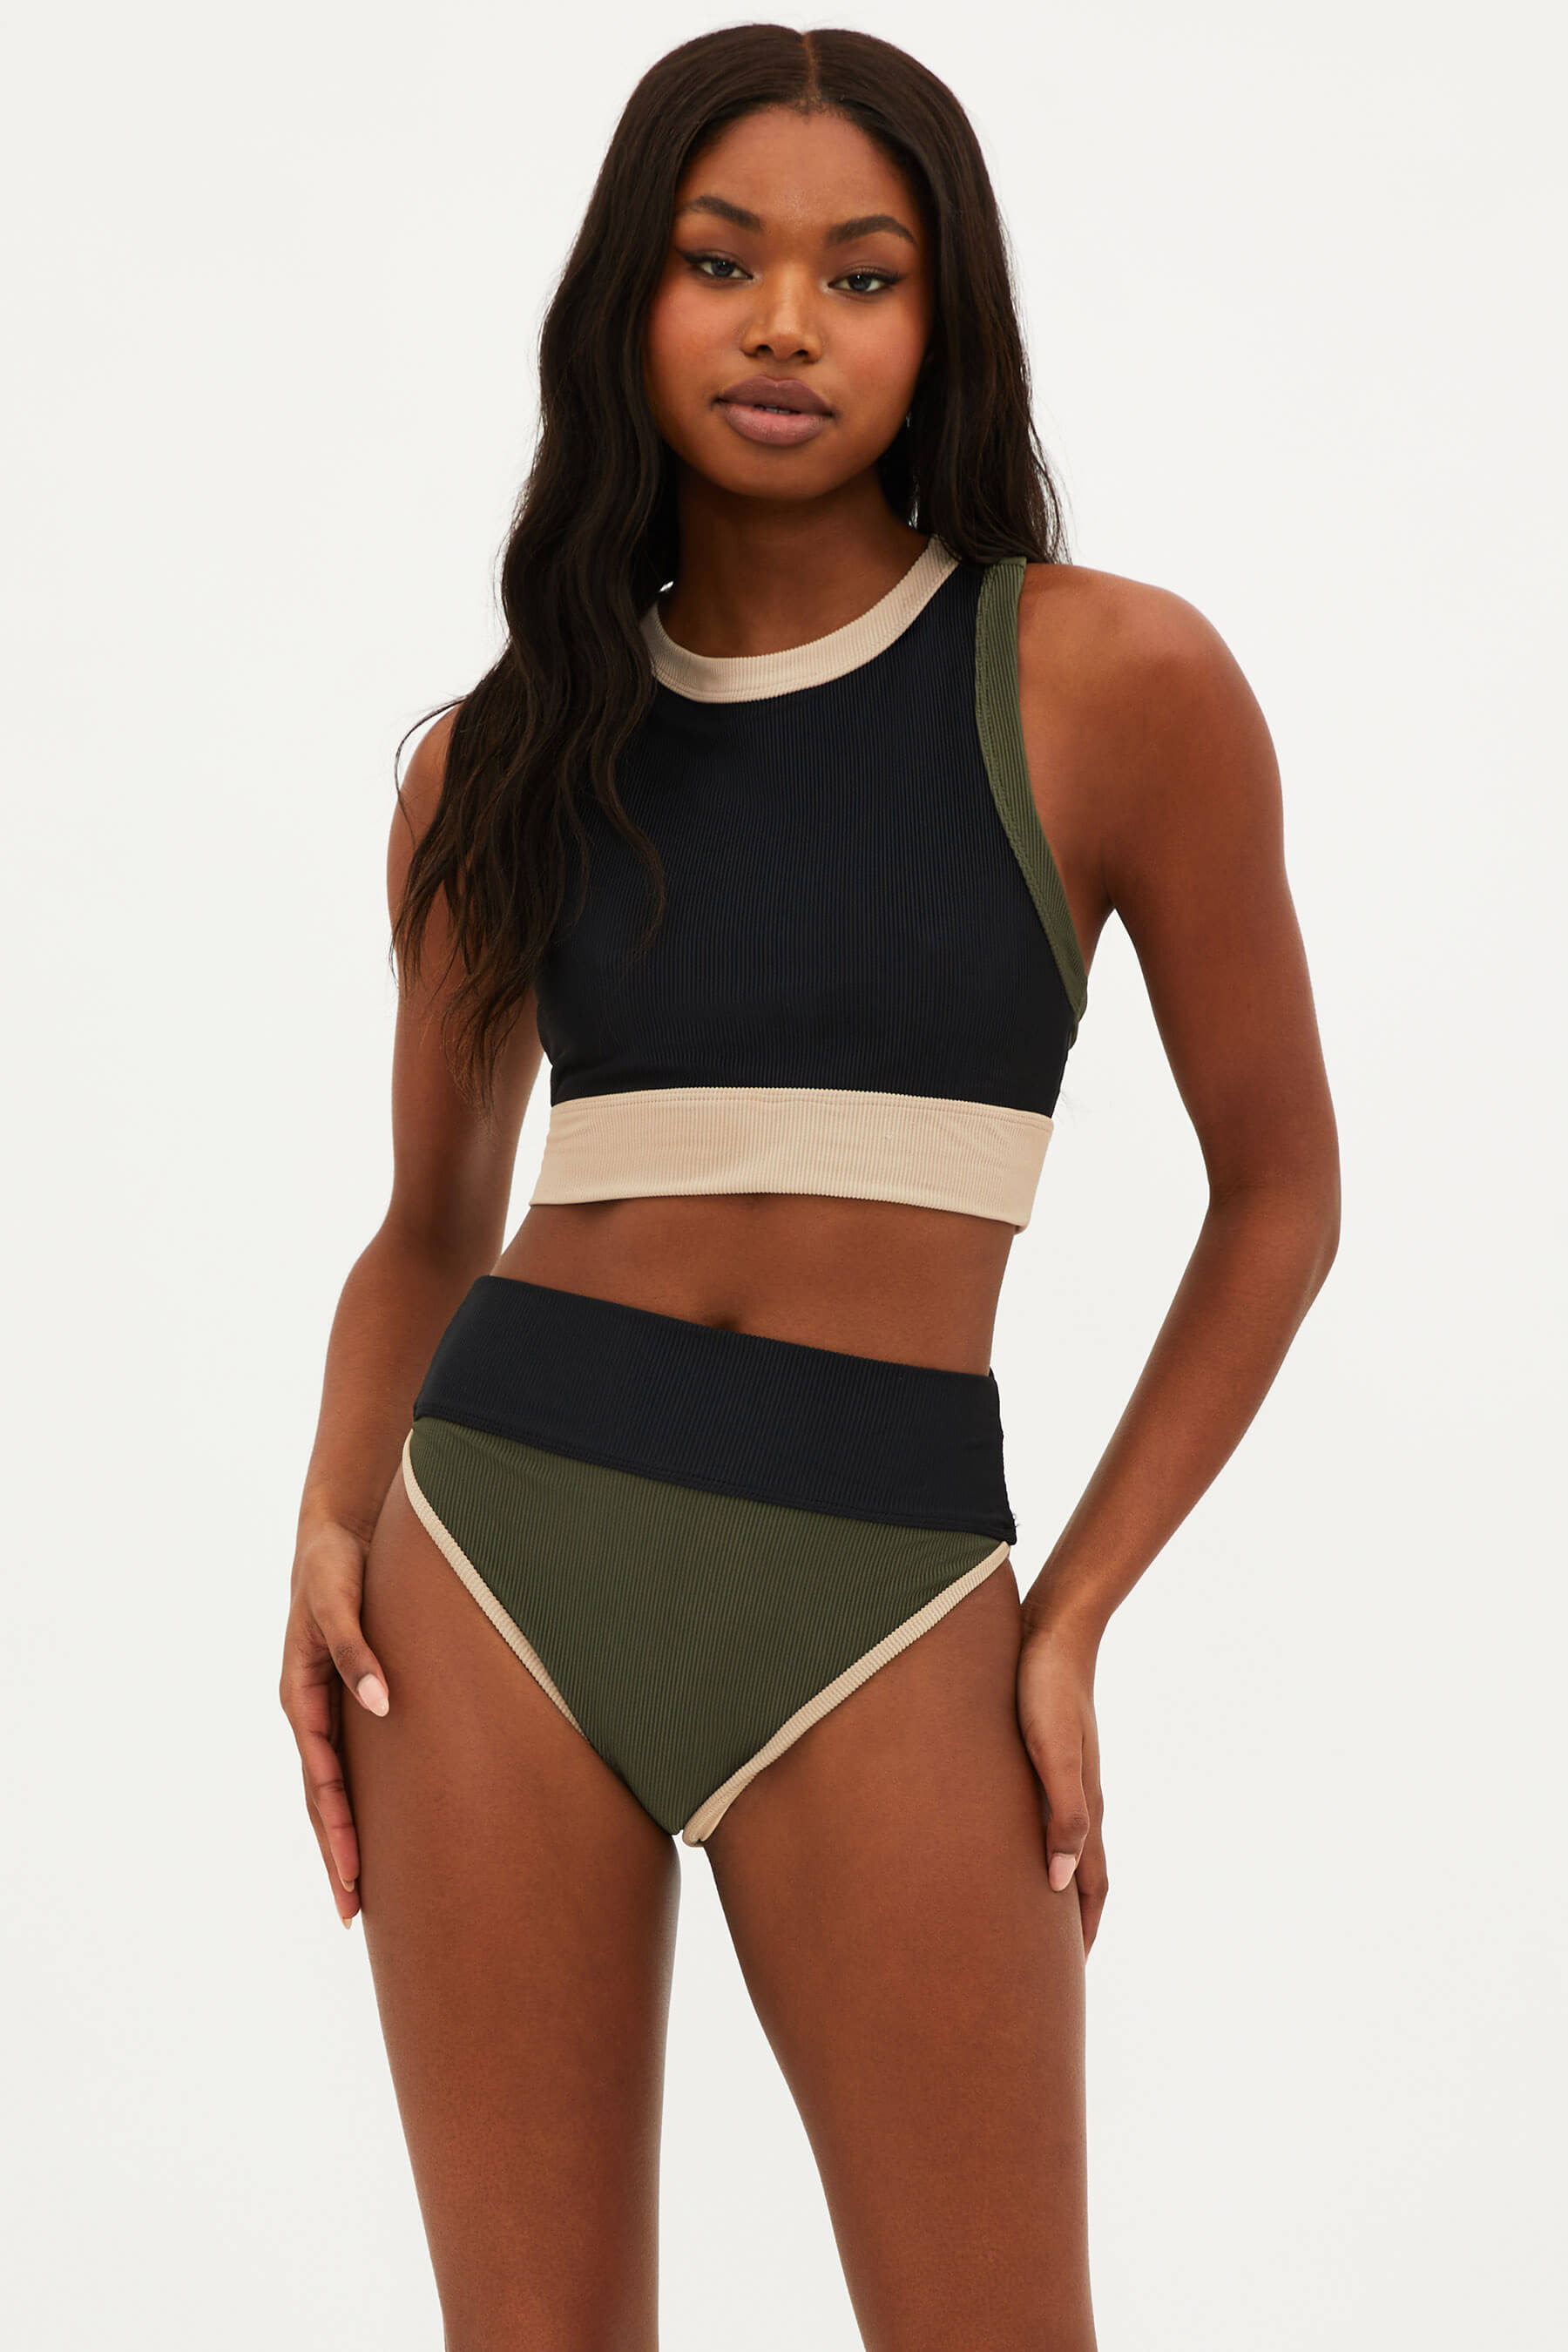 Gwen Top Military Olive Colorblock - Beach Riot